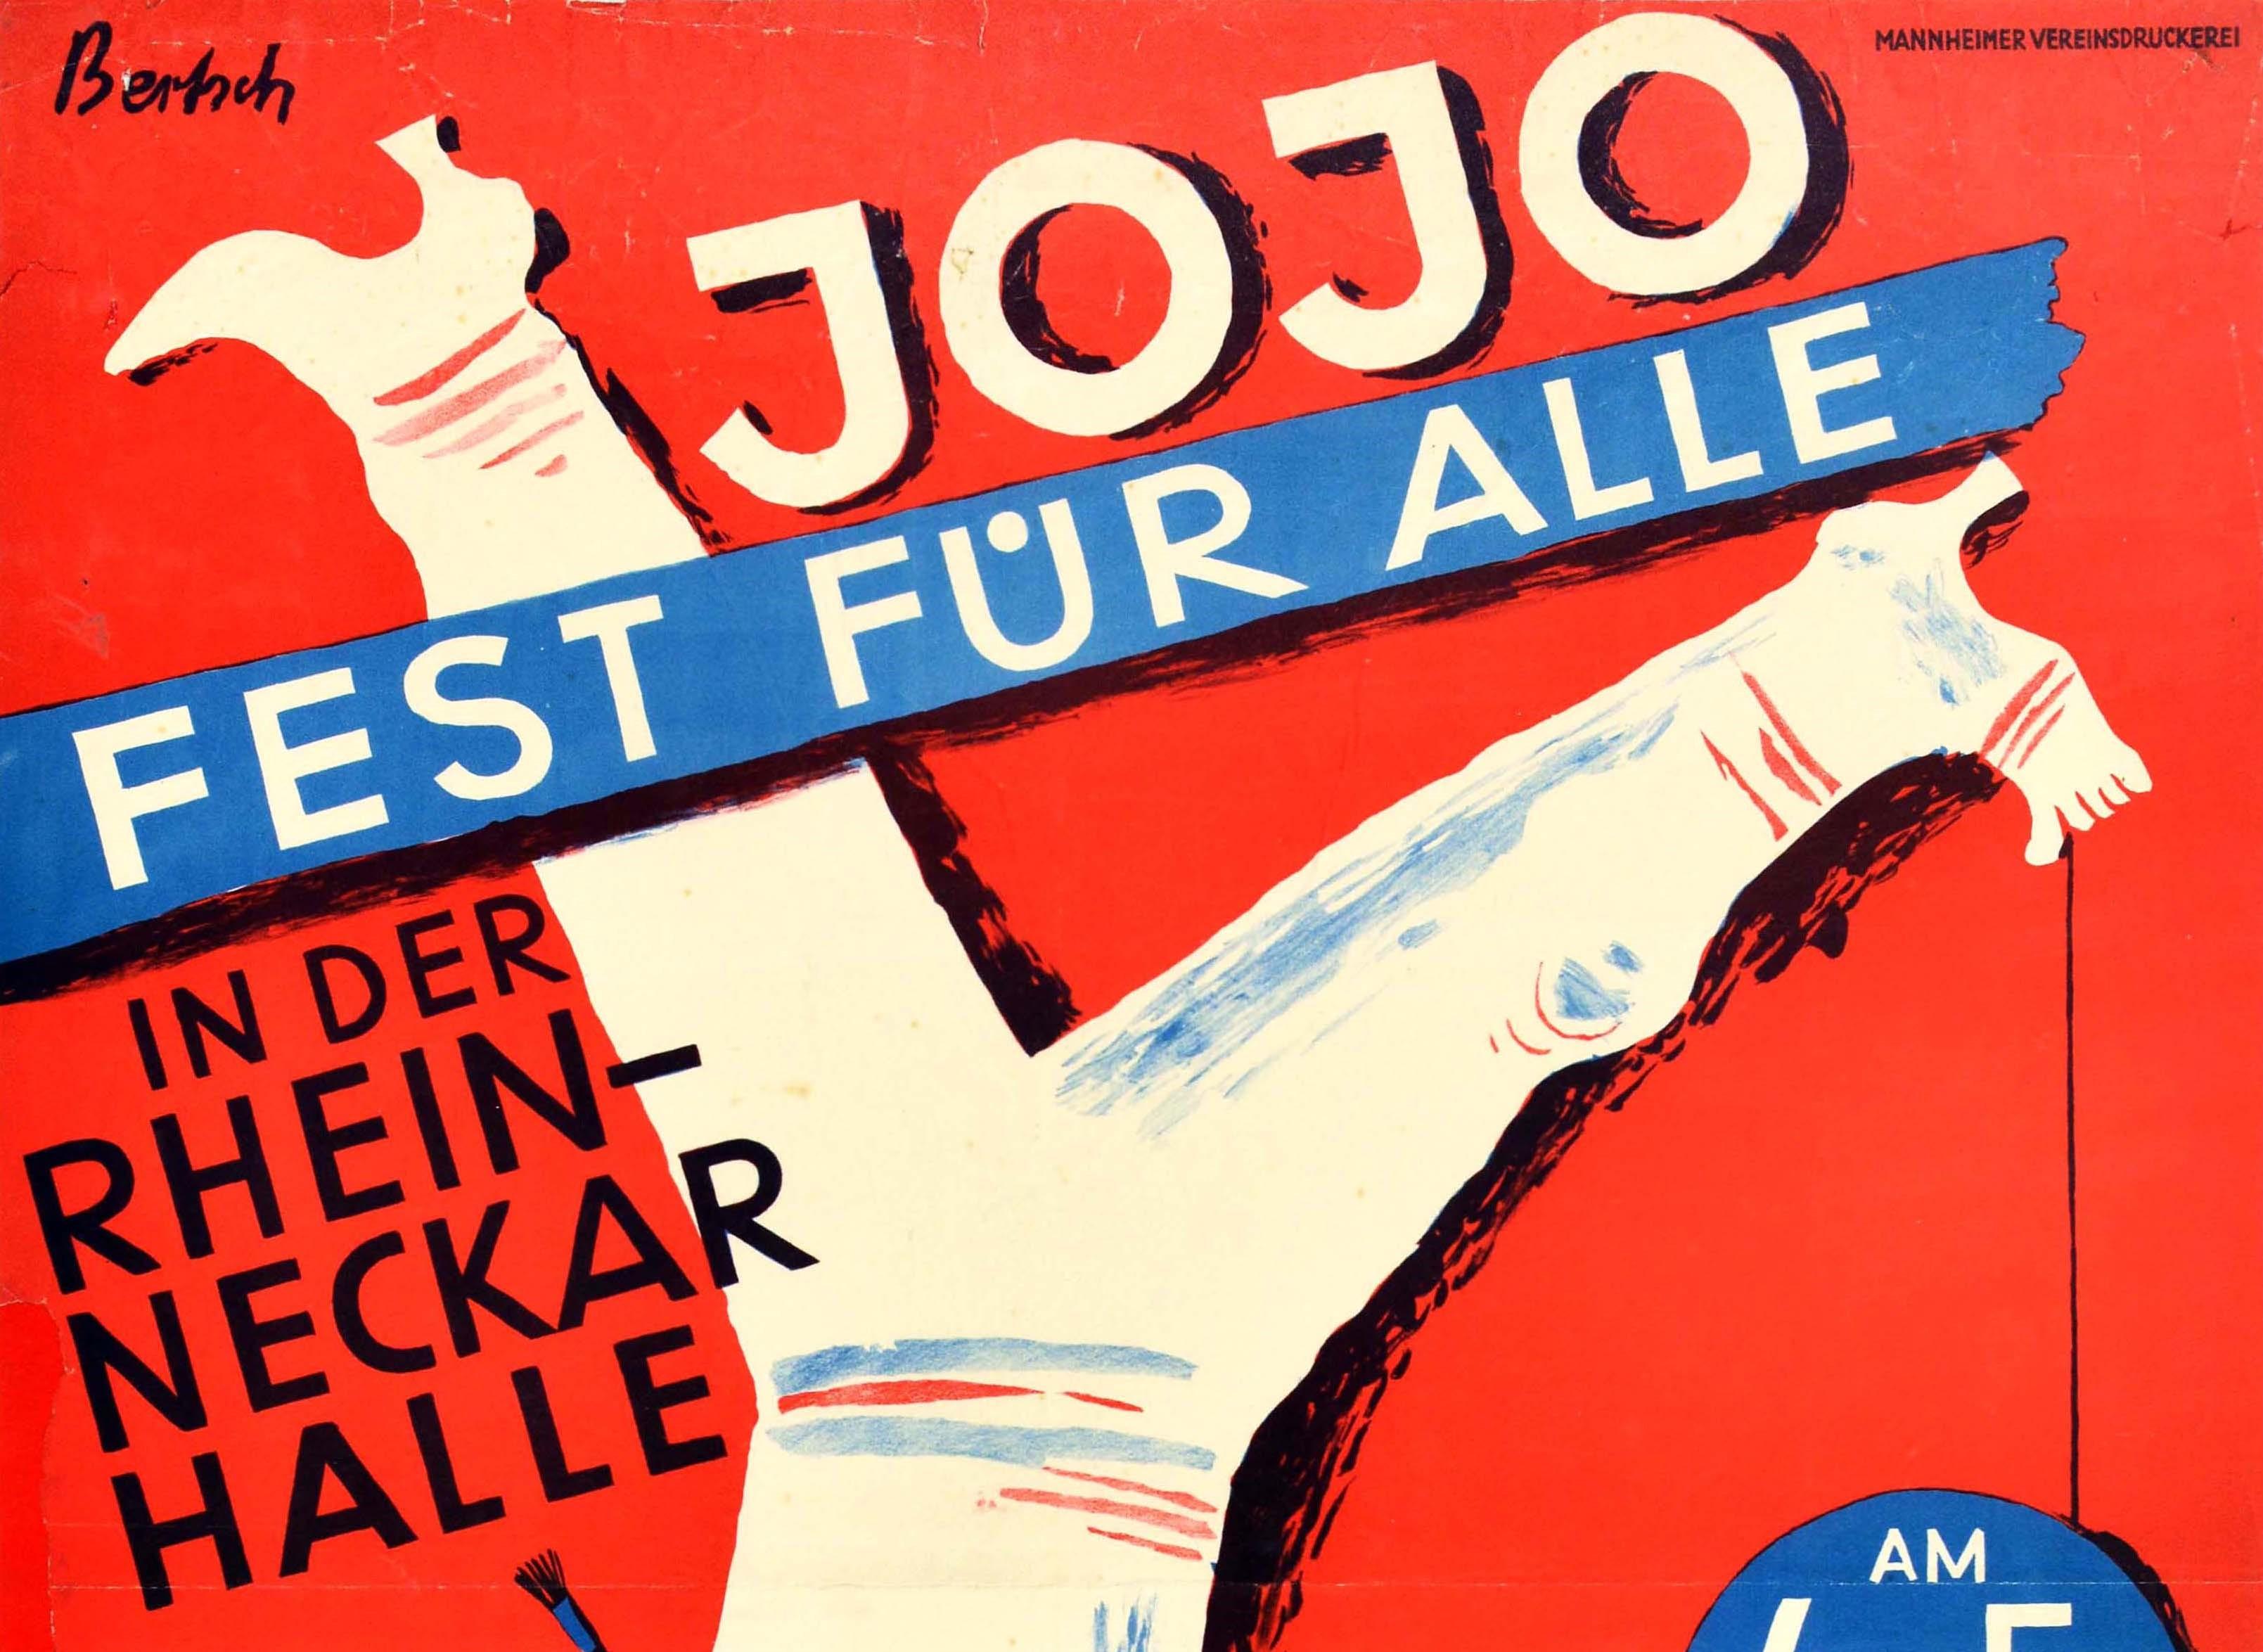 Original vintage advertising poster for the JoJo Fest fur Alle - the Jojo Festival for Everyone on 4-5 February 1933 at the Rhein-Neckar Halle with Yoyo Girls the European Dance Champion K.R. Weinlein M. Seidel Erwin Schmieder and his Orchestra 22